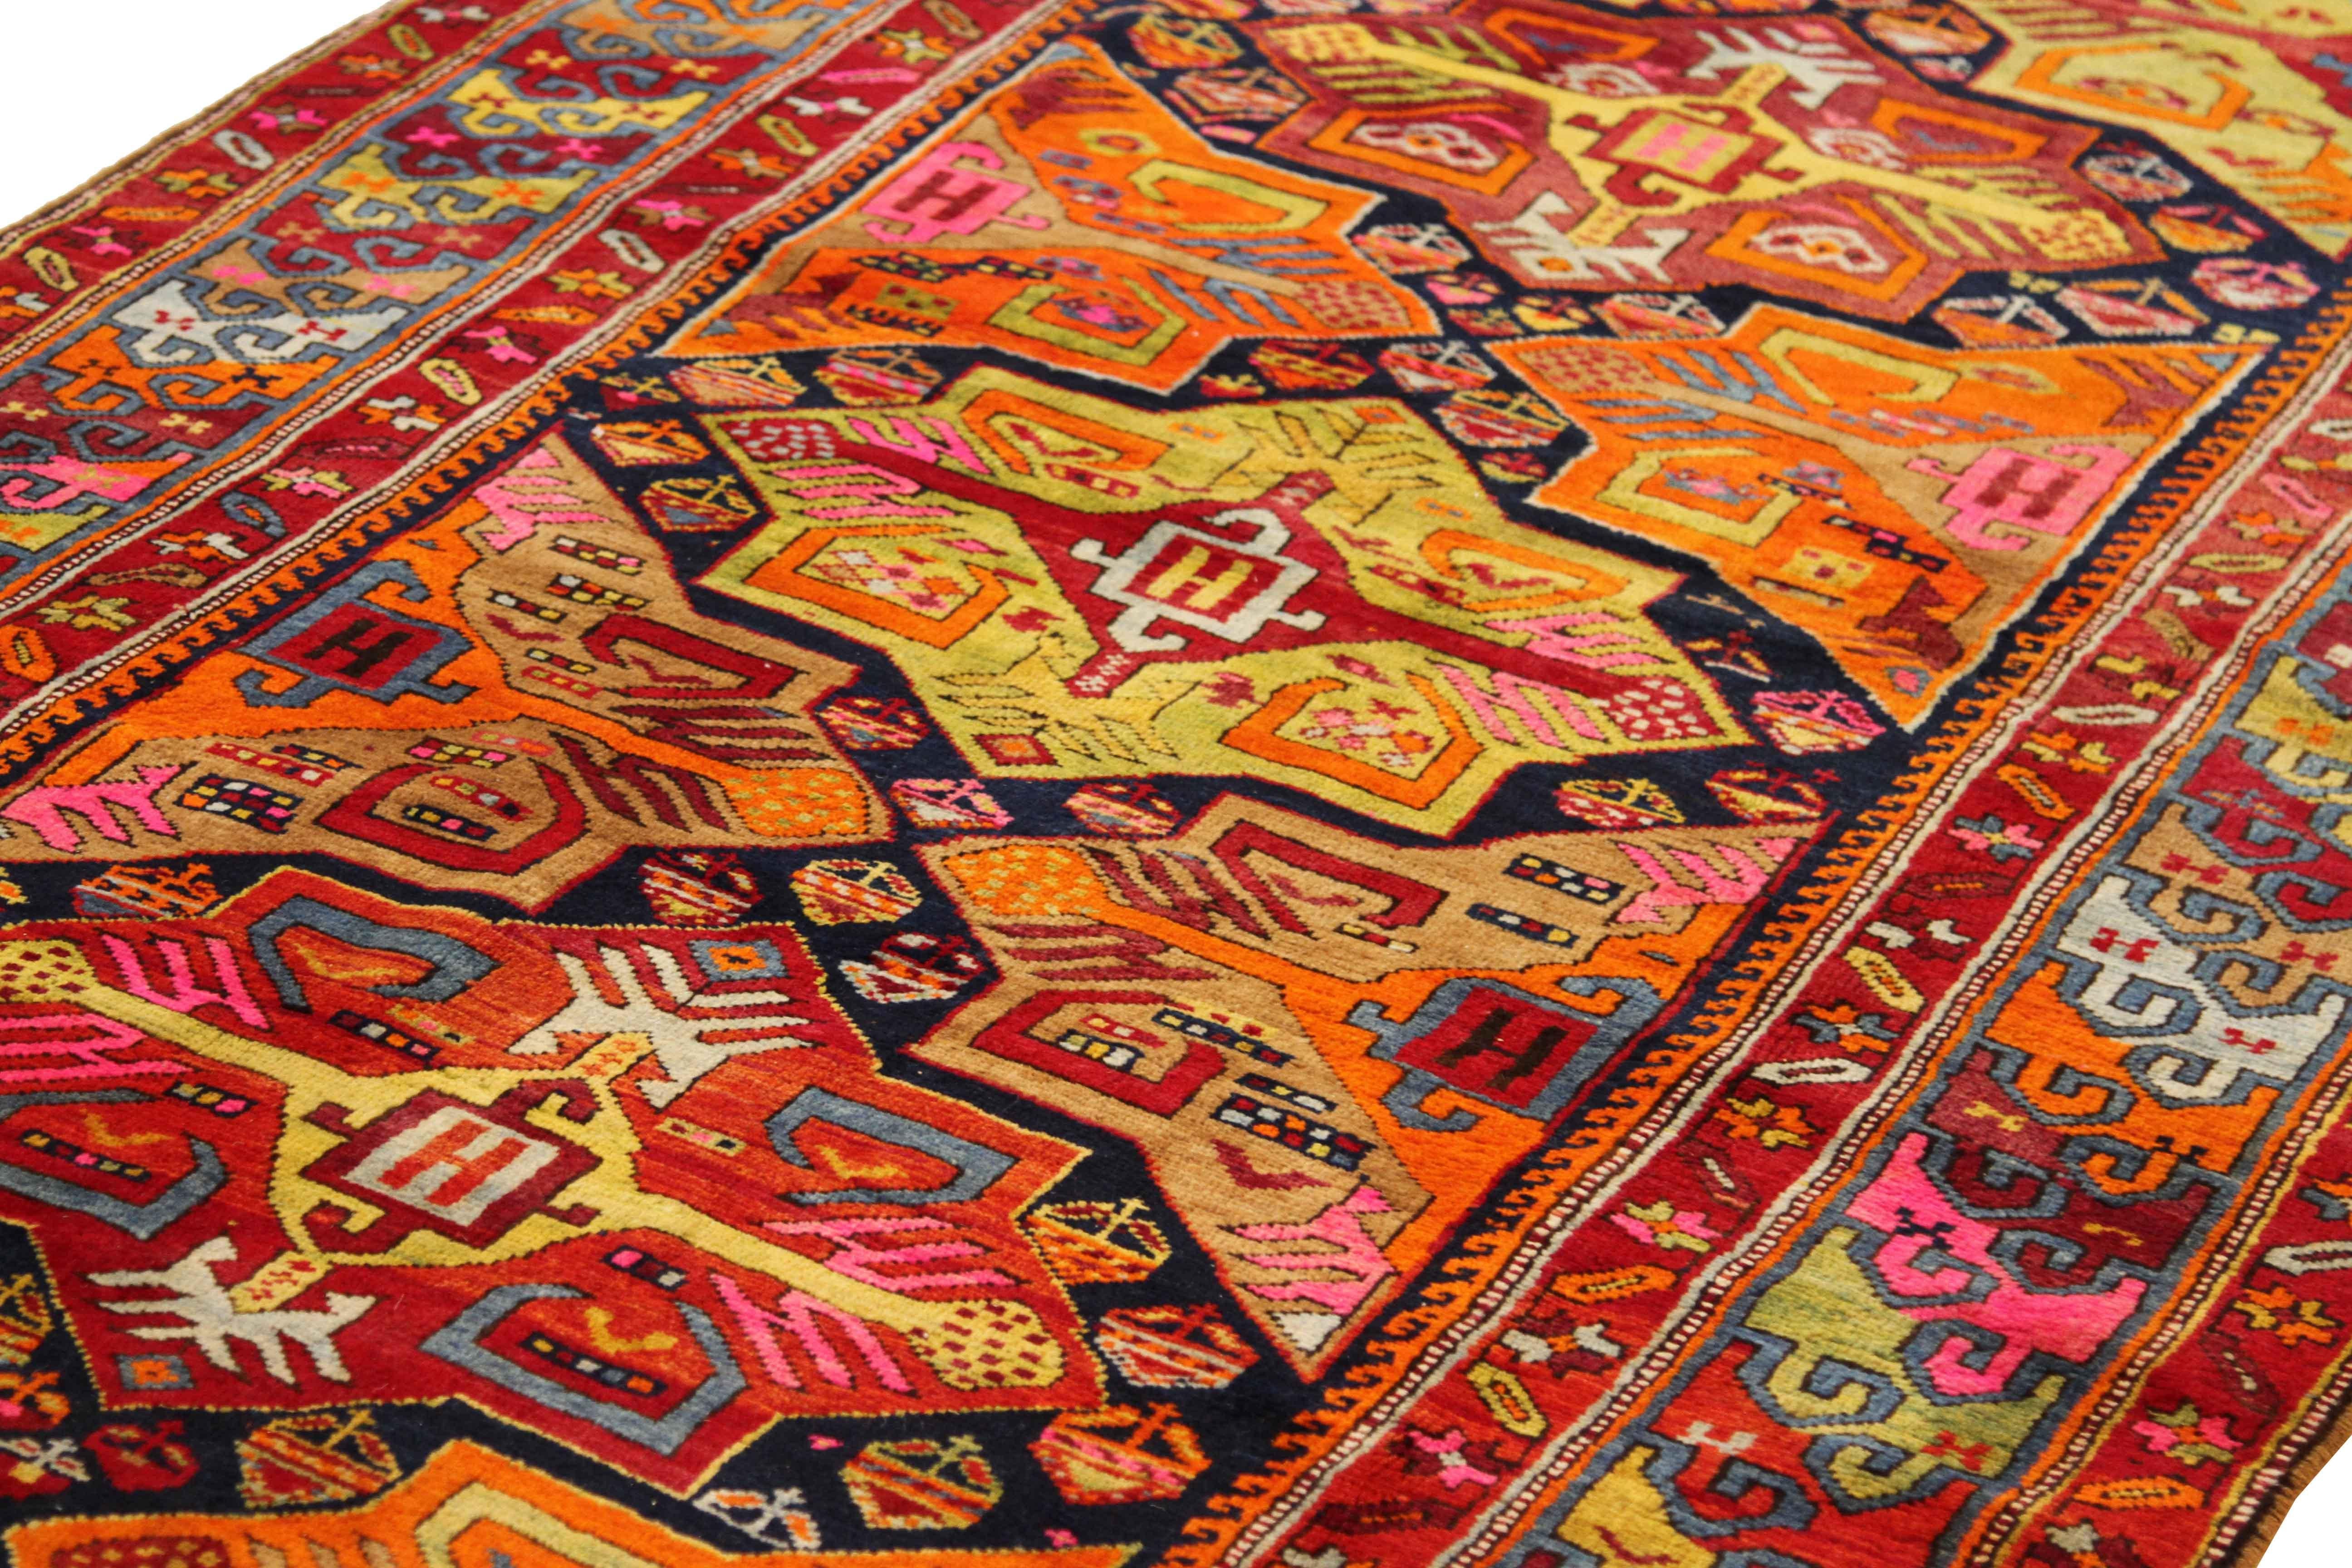 Hand-Knotted 1960s Antique Persian Rug Azerbaijan Design With Pastel Colored Traditional Moti